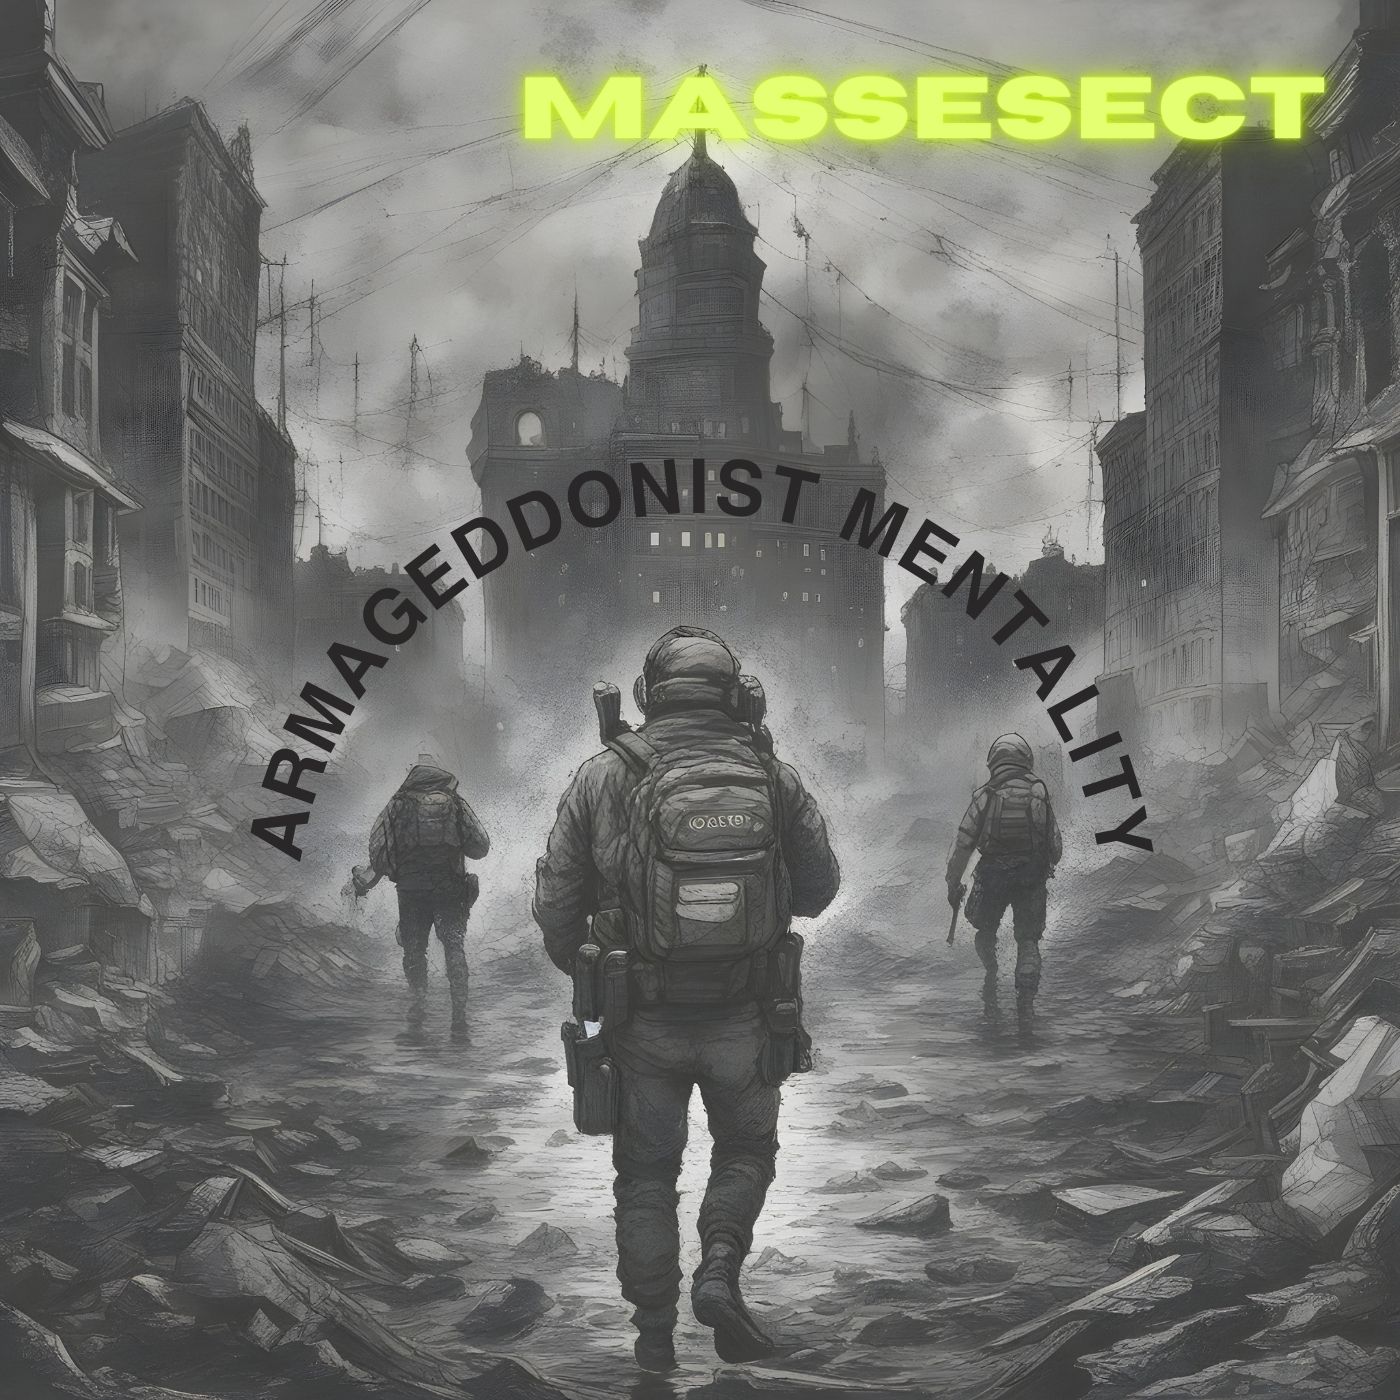 Massesect Armageddonist Mentality Cover.jpeg